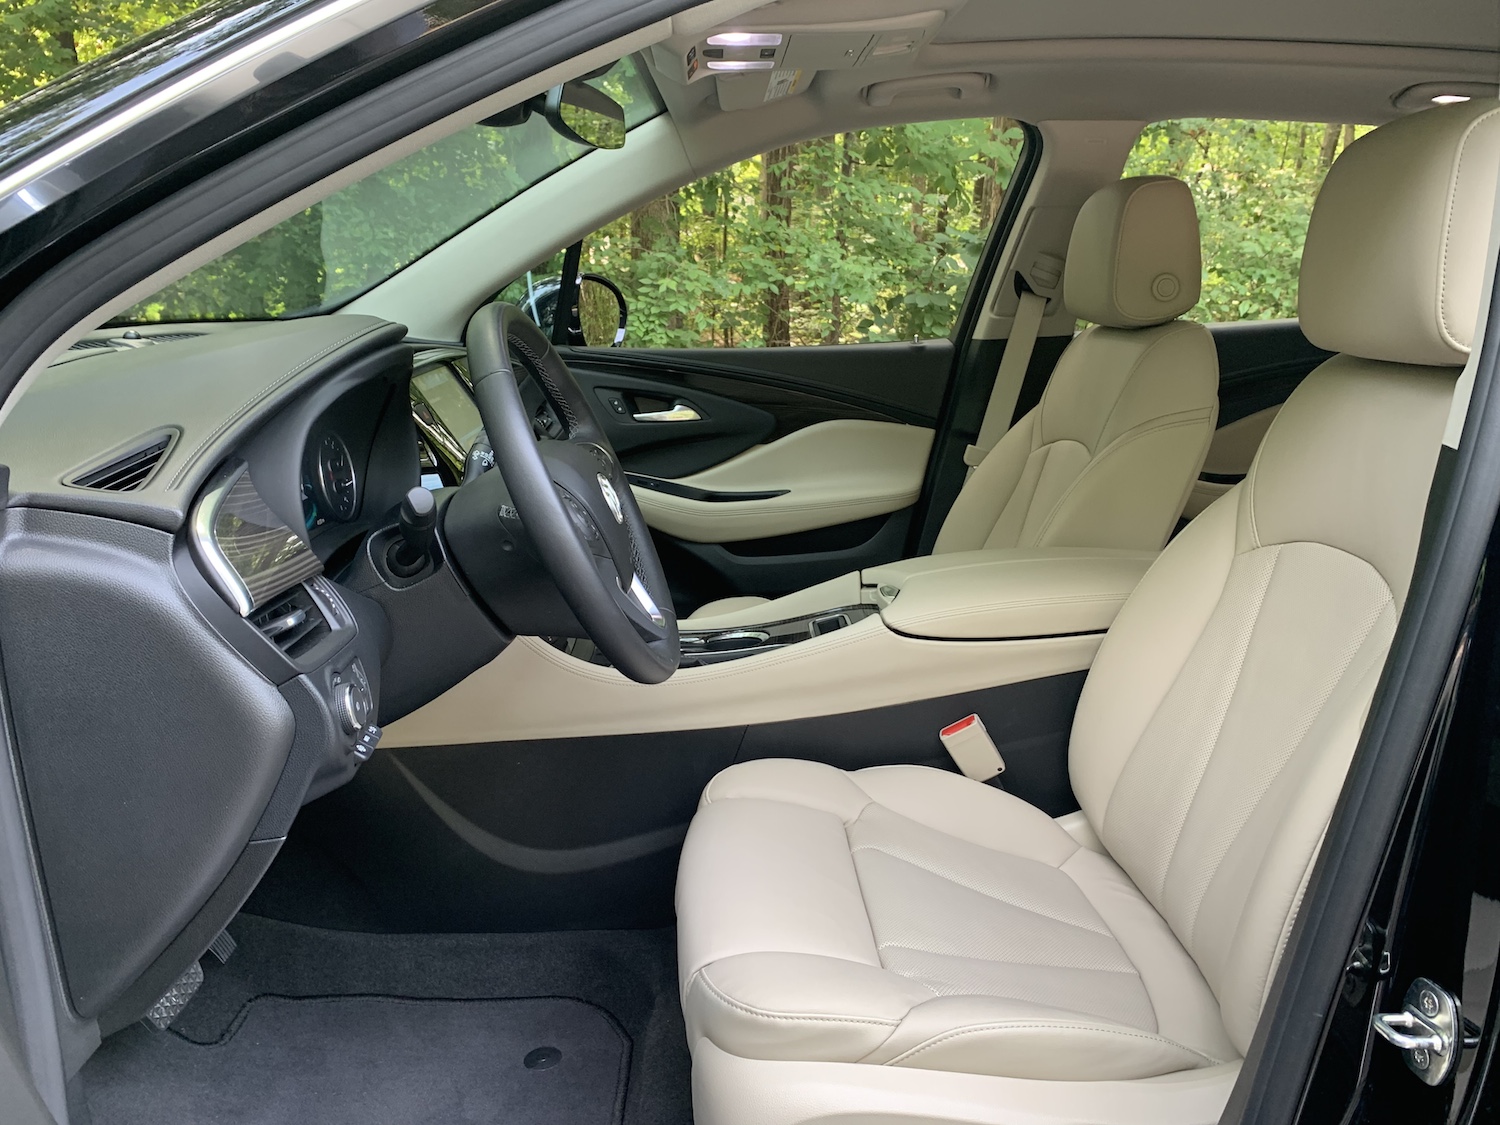 2019 Buick Envision front seats